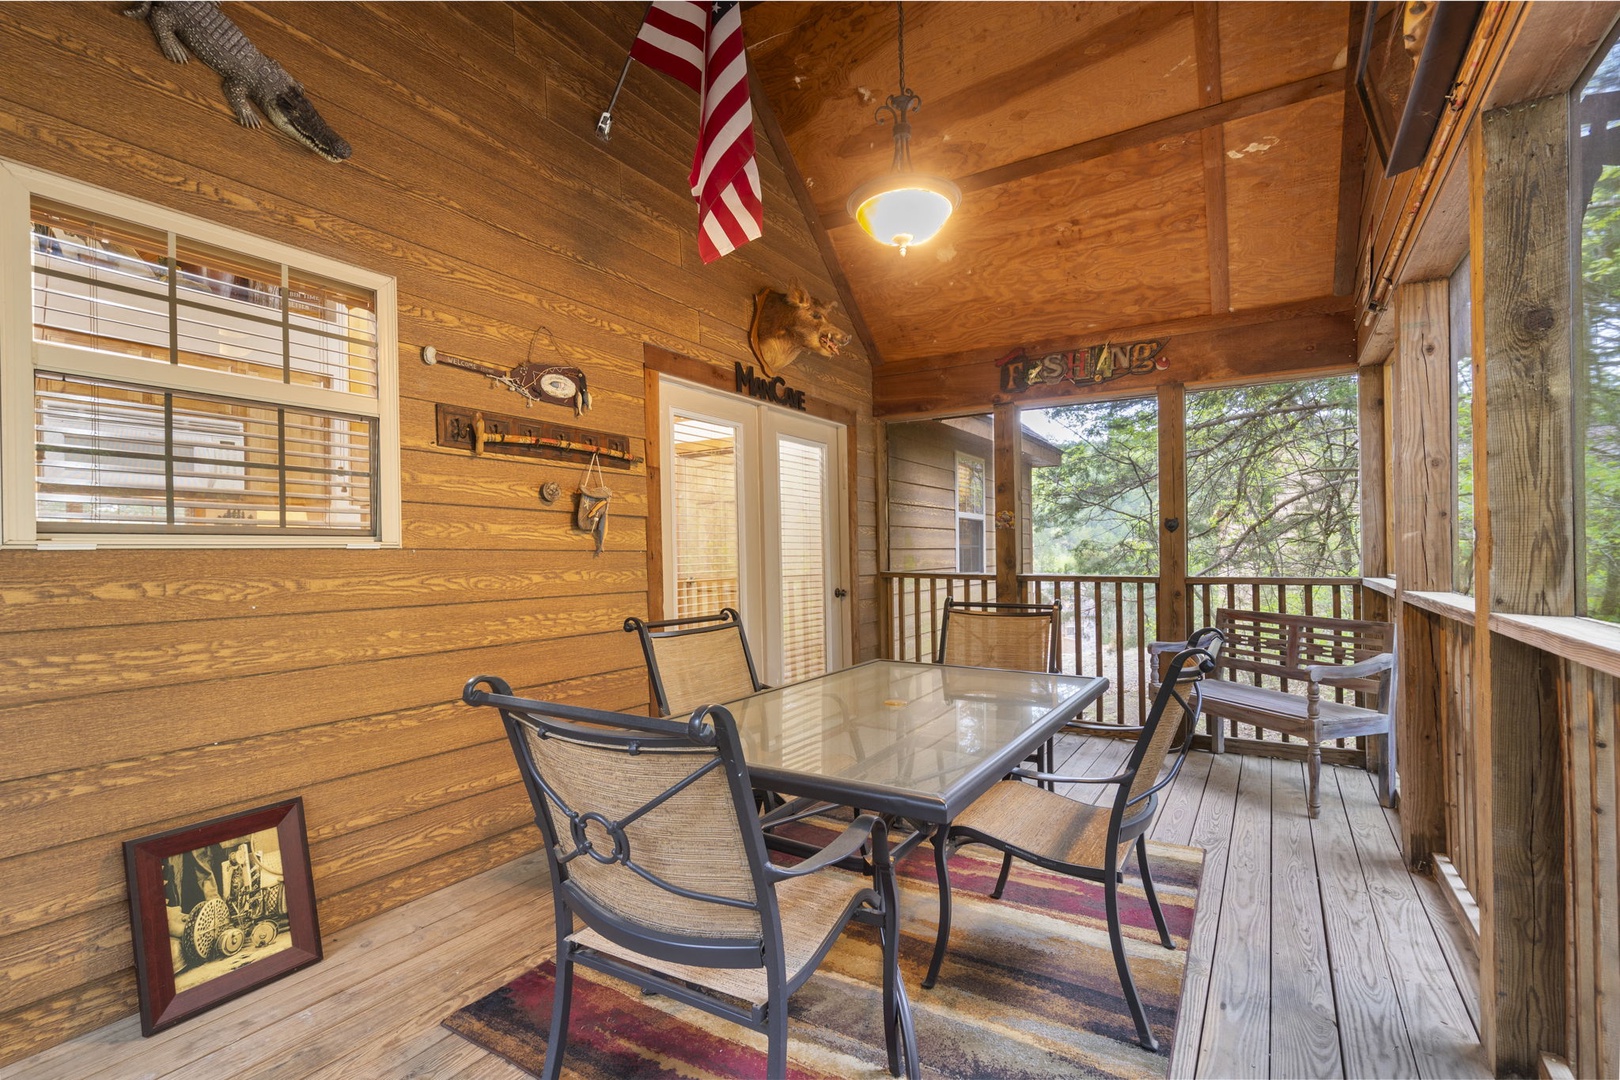 Enjoy alfresco dining or lounge the day away on the screened deck